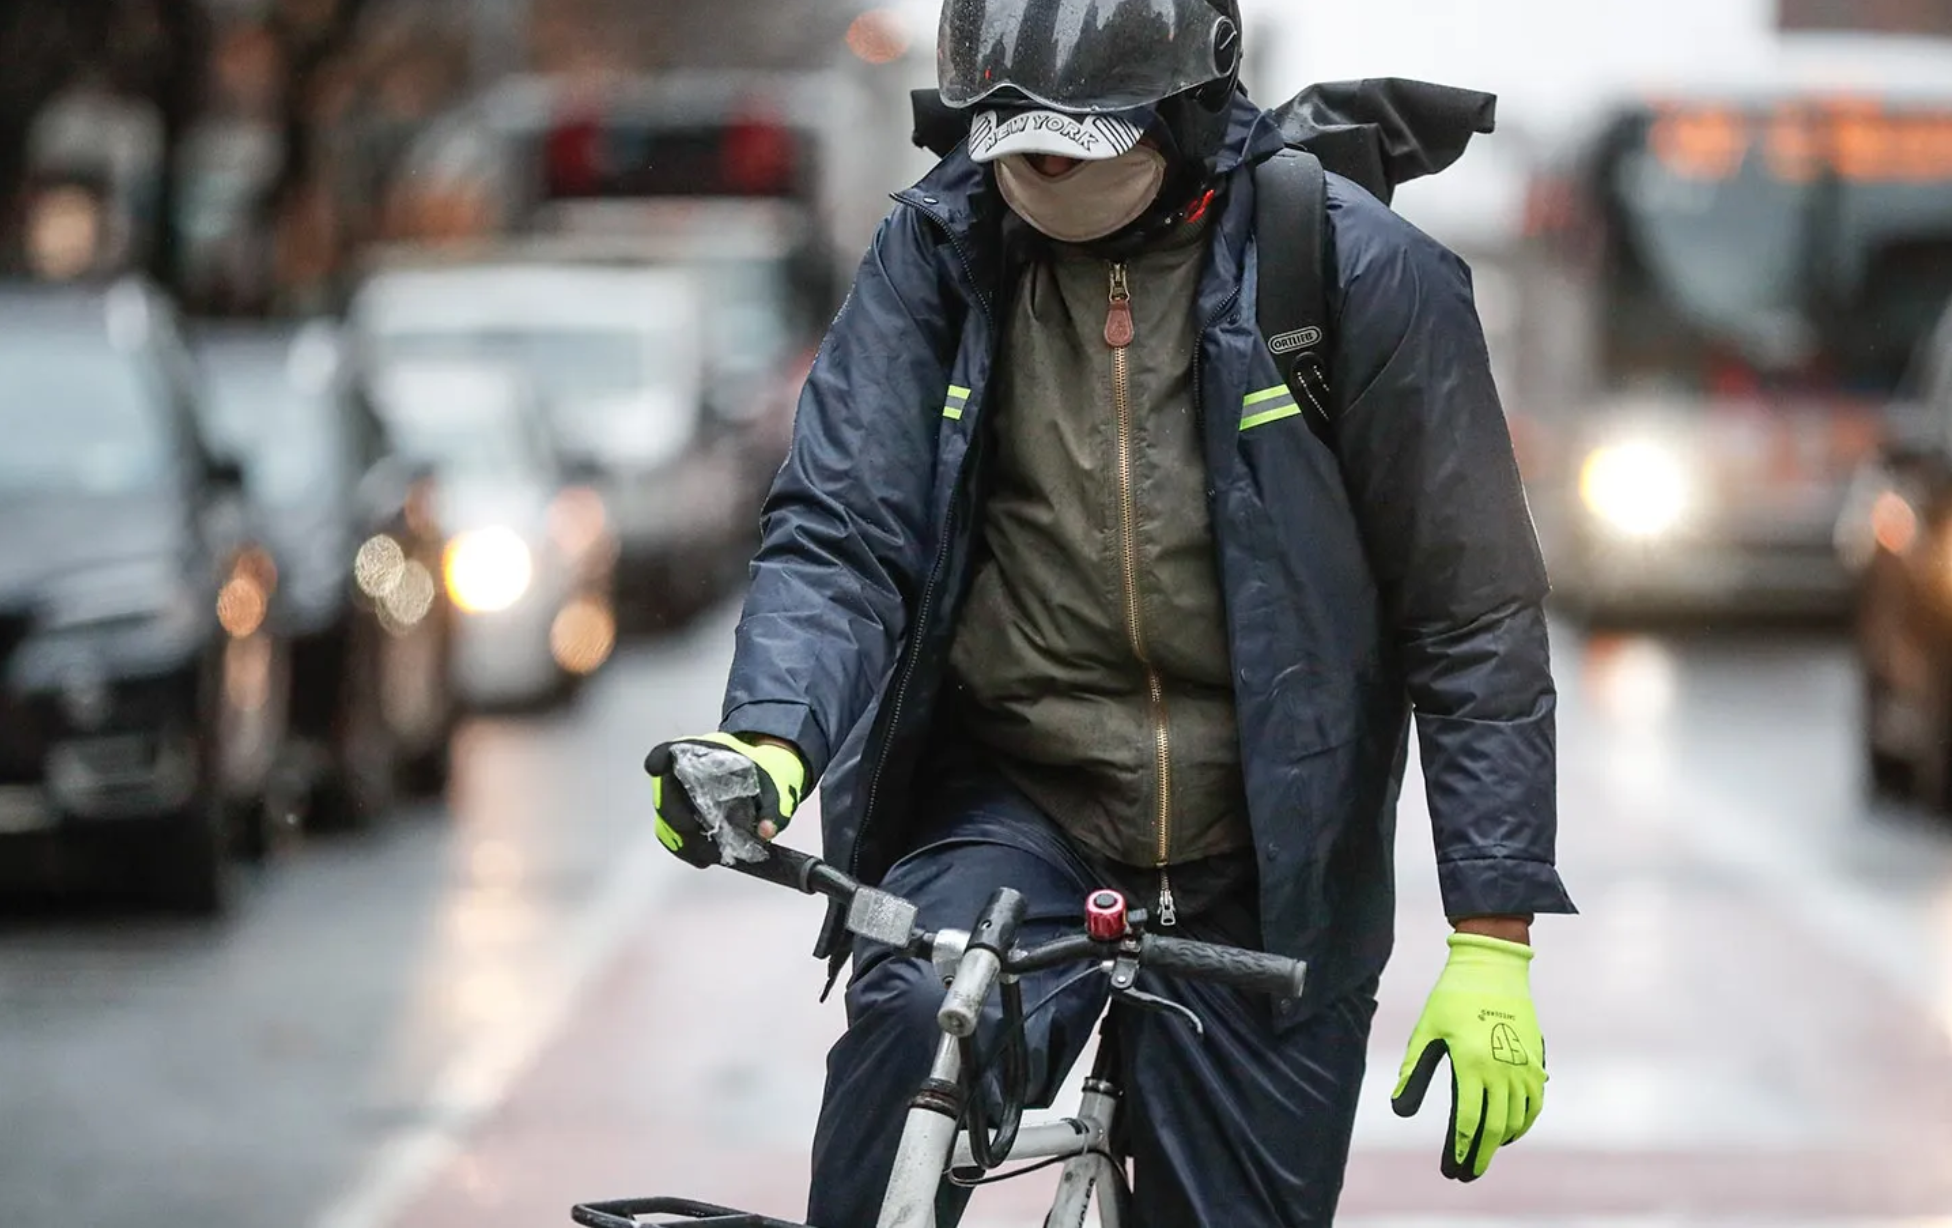 A delivery worker wears protective gloves and a face mask as he rides through traffic, March 23, 2020, in New York. (John Minchillo / AP Photo)